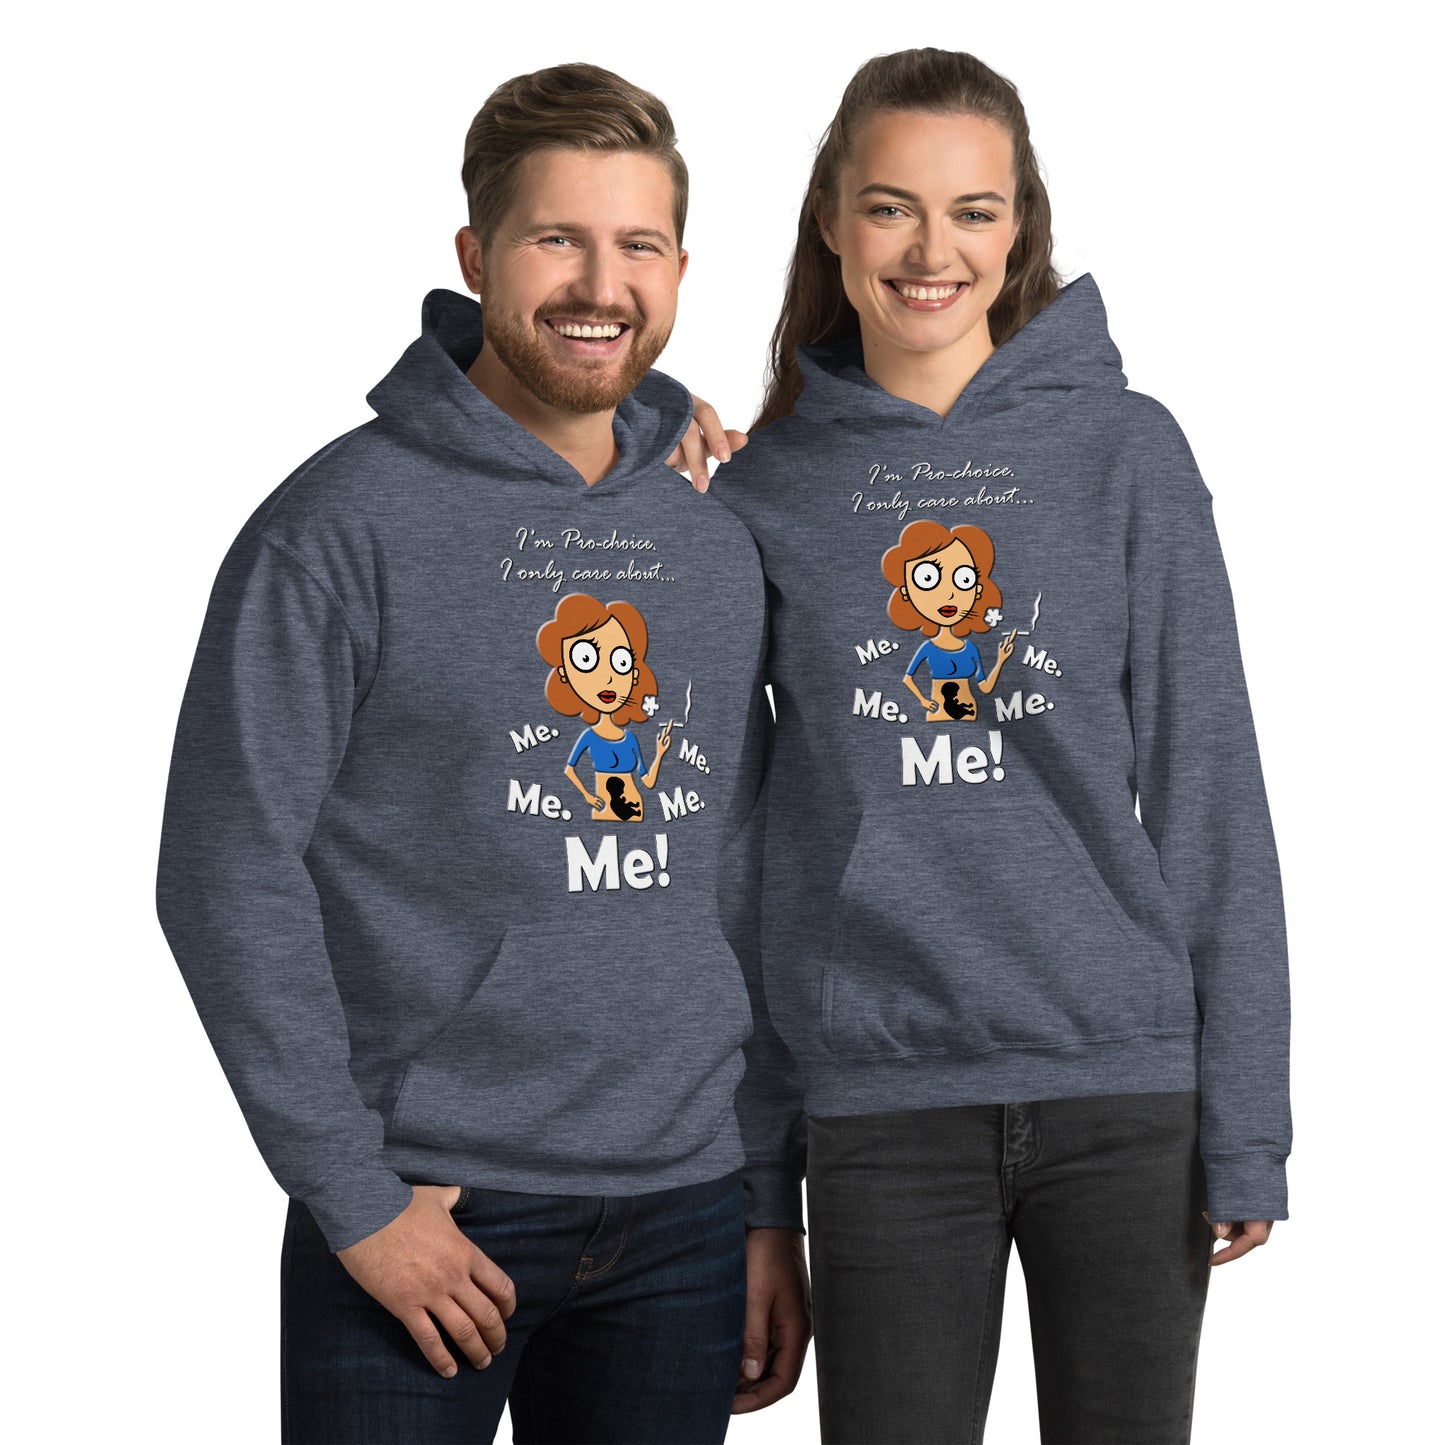 A015 Hoodie – Gildan 18500 Unisex Hoodie Featuring a Graphic of a Young Pregnant Woman Smoking, with the Text “I’m Pro-choice. I Only Care About Me. Me. Me. Me. Me!”